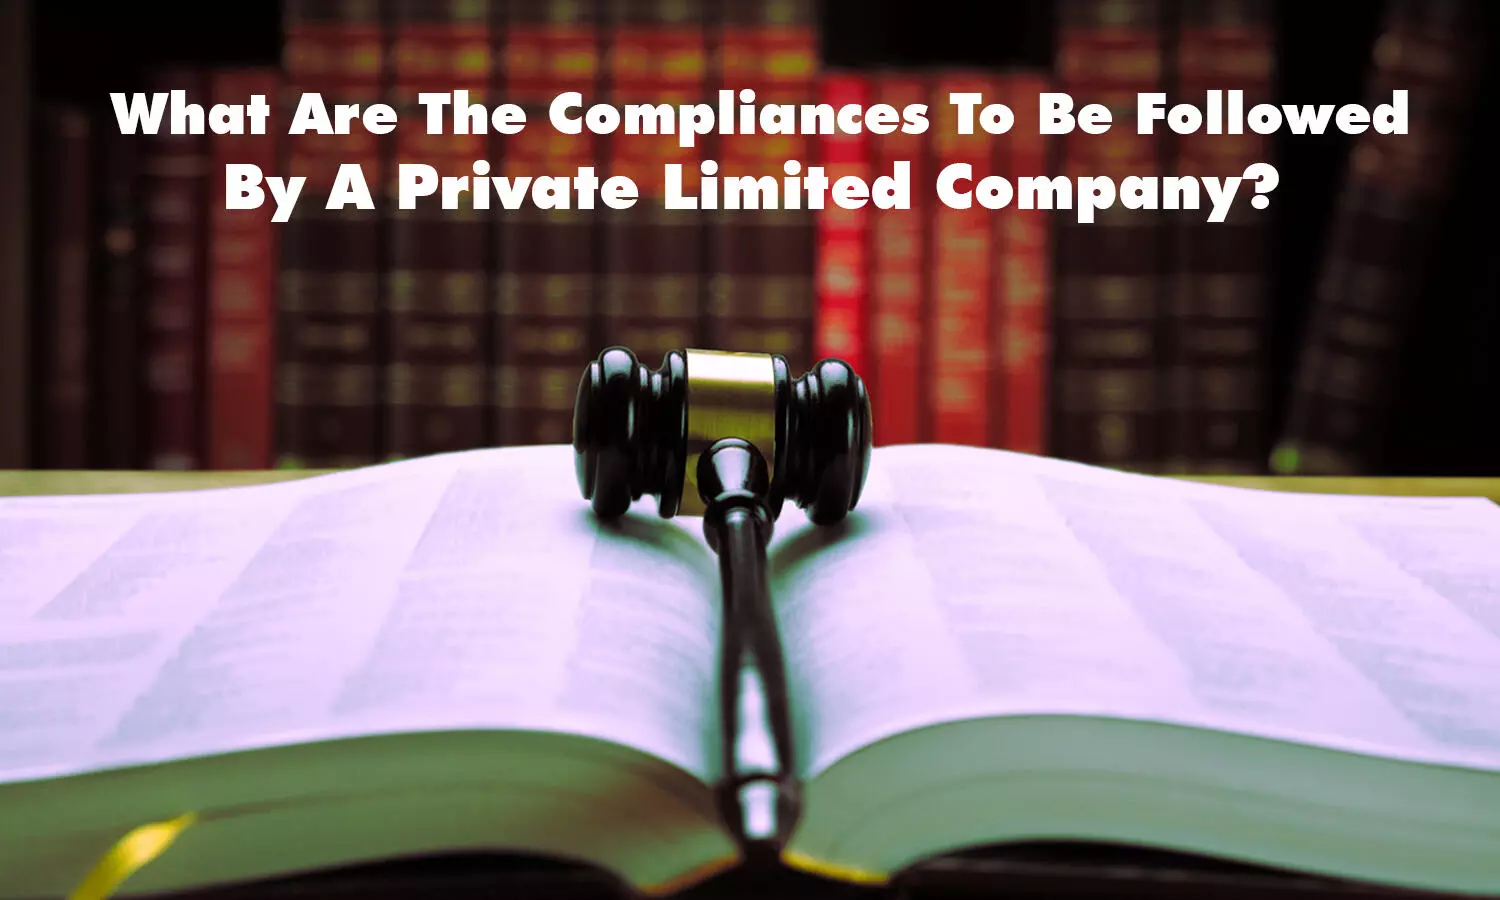 What Are The Compliances To Be Followed By A Private Limited Company?